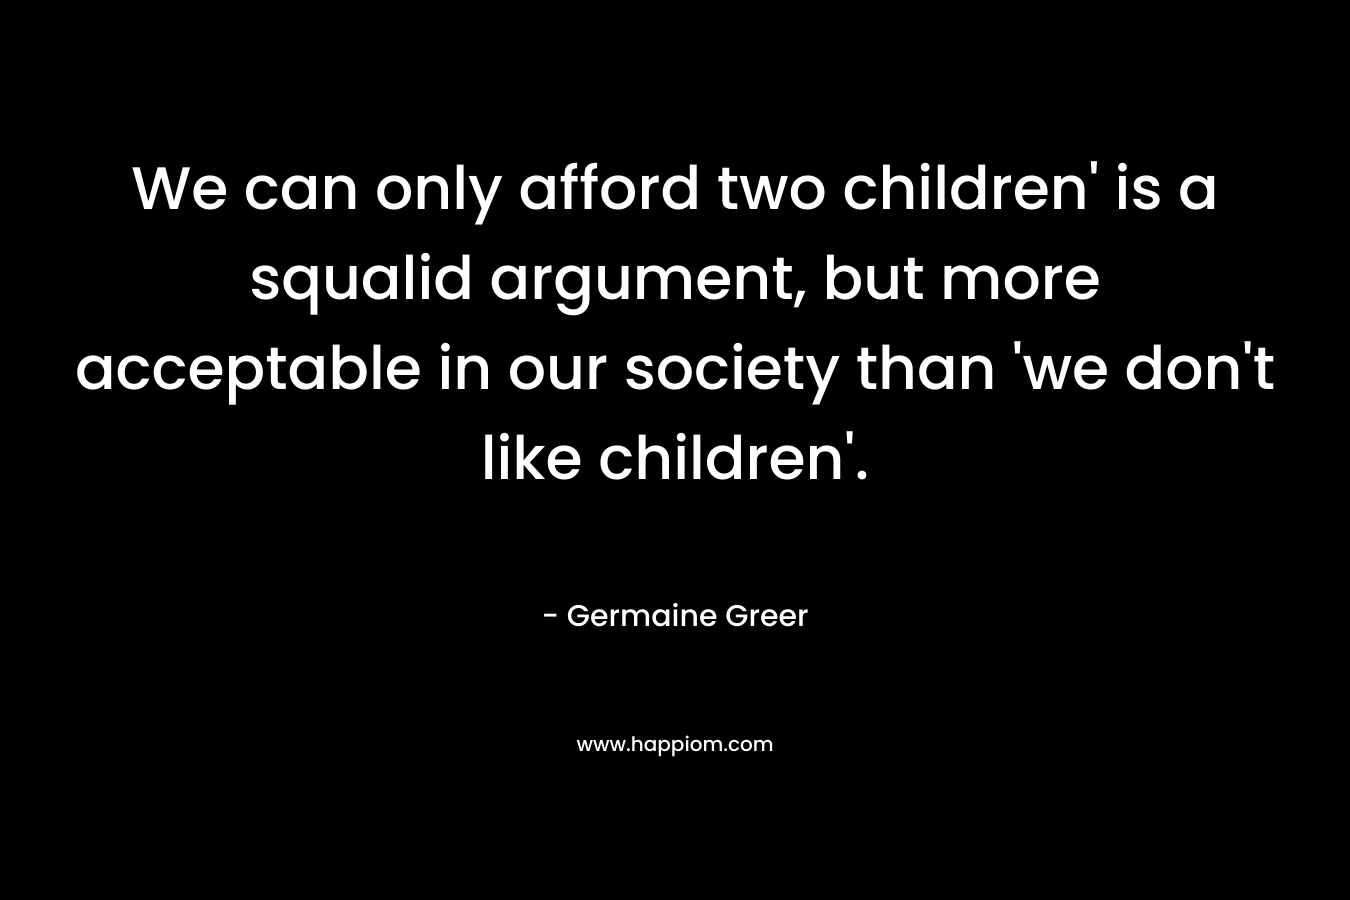 We can only afford two children' is a squalid argument, but more acceptable in our society than 'we don't like children'.